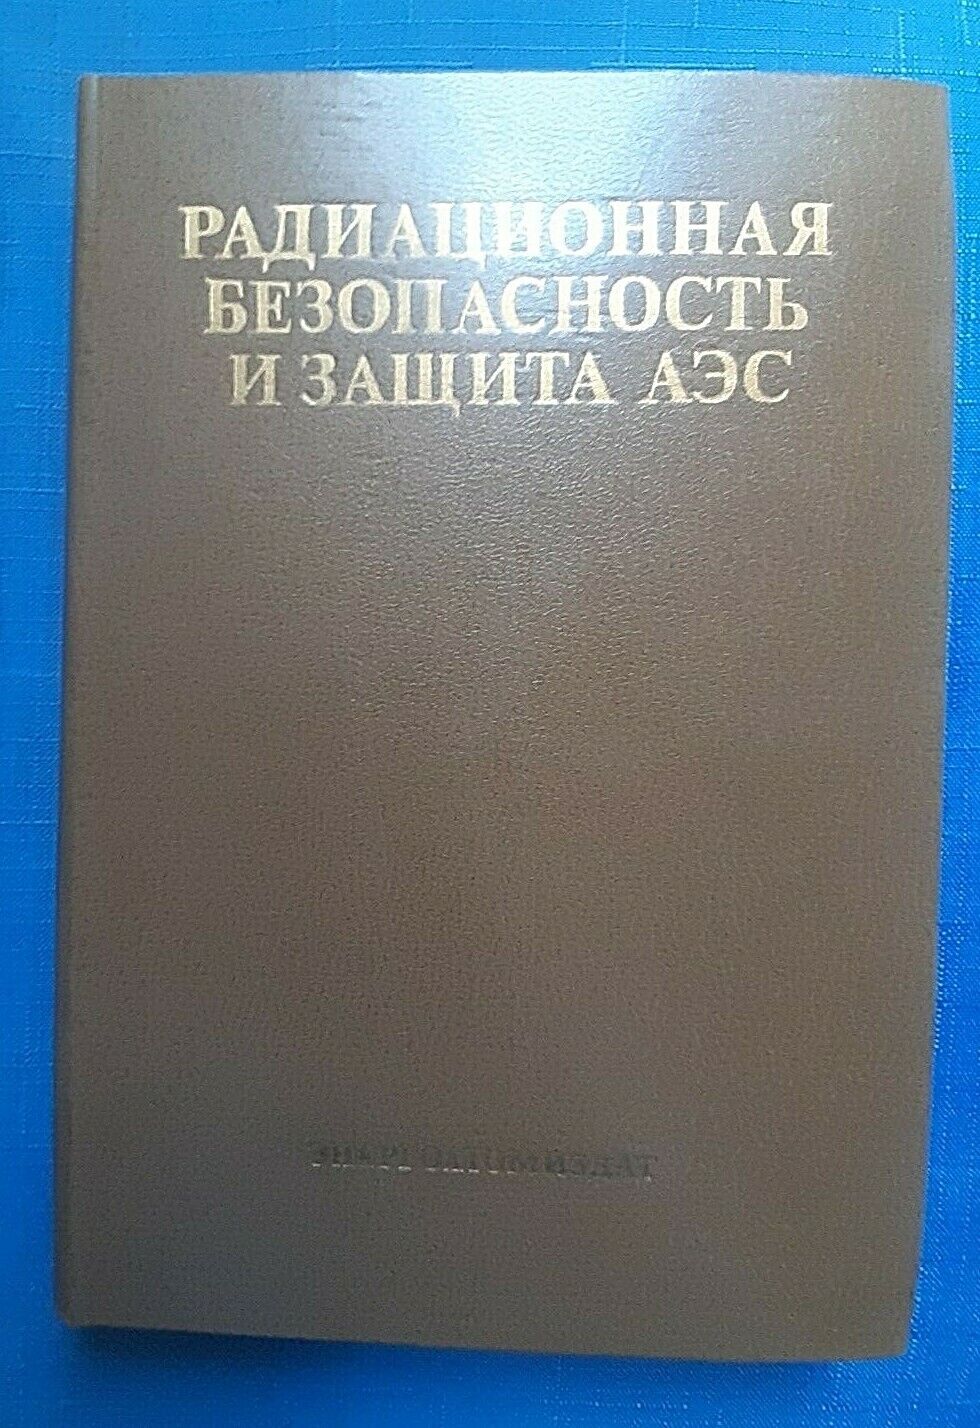 1984 Radiation Safety Protection Nuclear Power Plant Atomic russian book 950 pcs